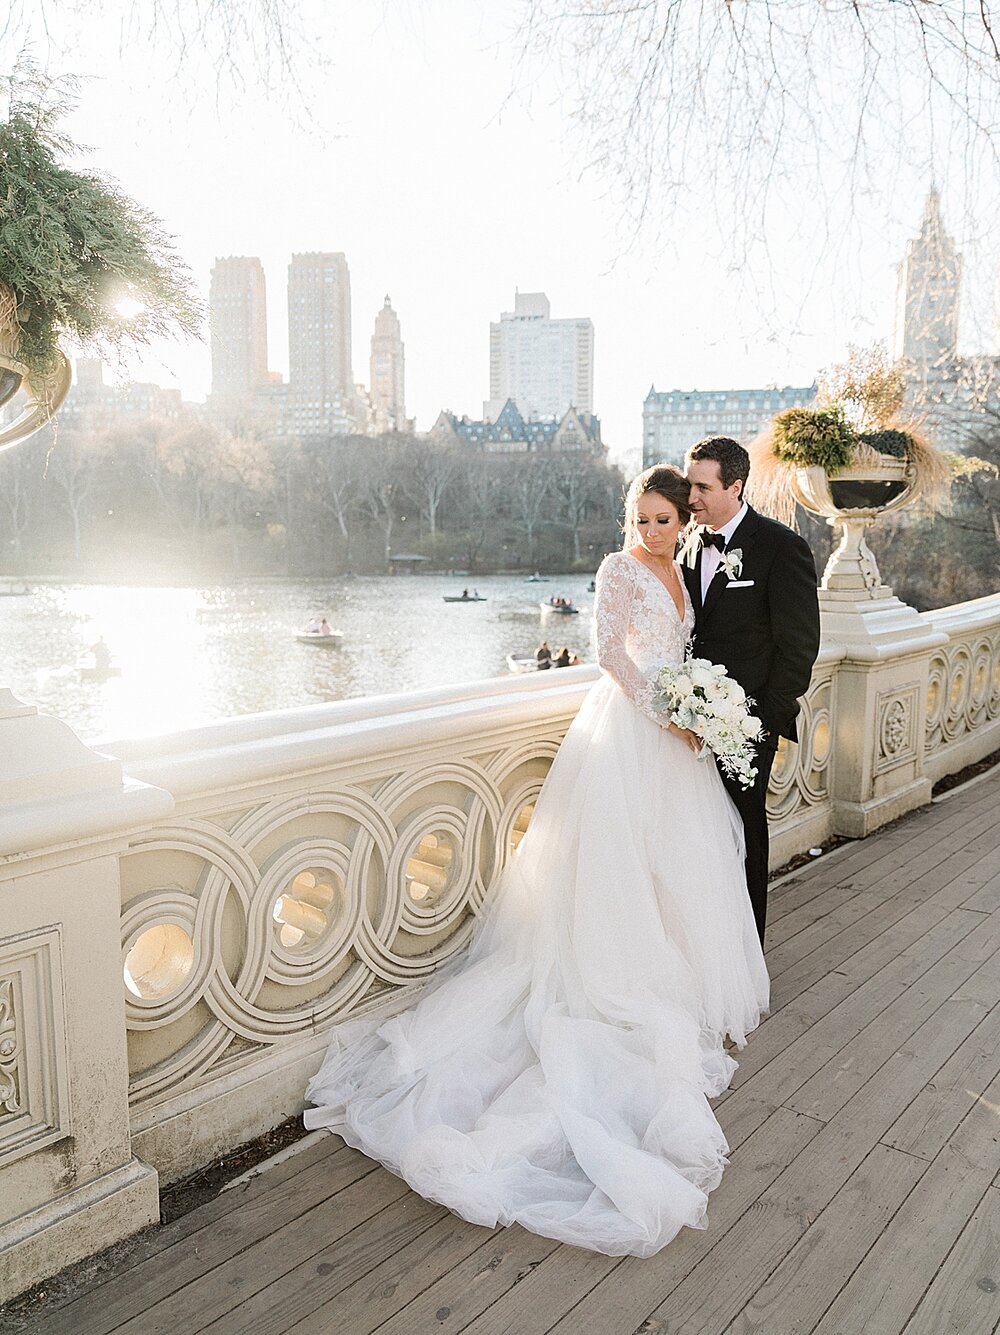 wedding portraits at sunset in Central Park | Tri-State area wedding venues photographed by Asher Gardner Photography